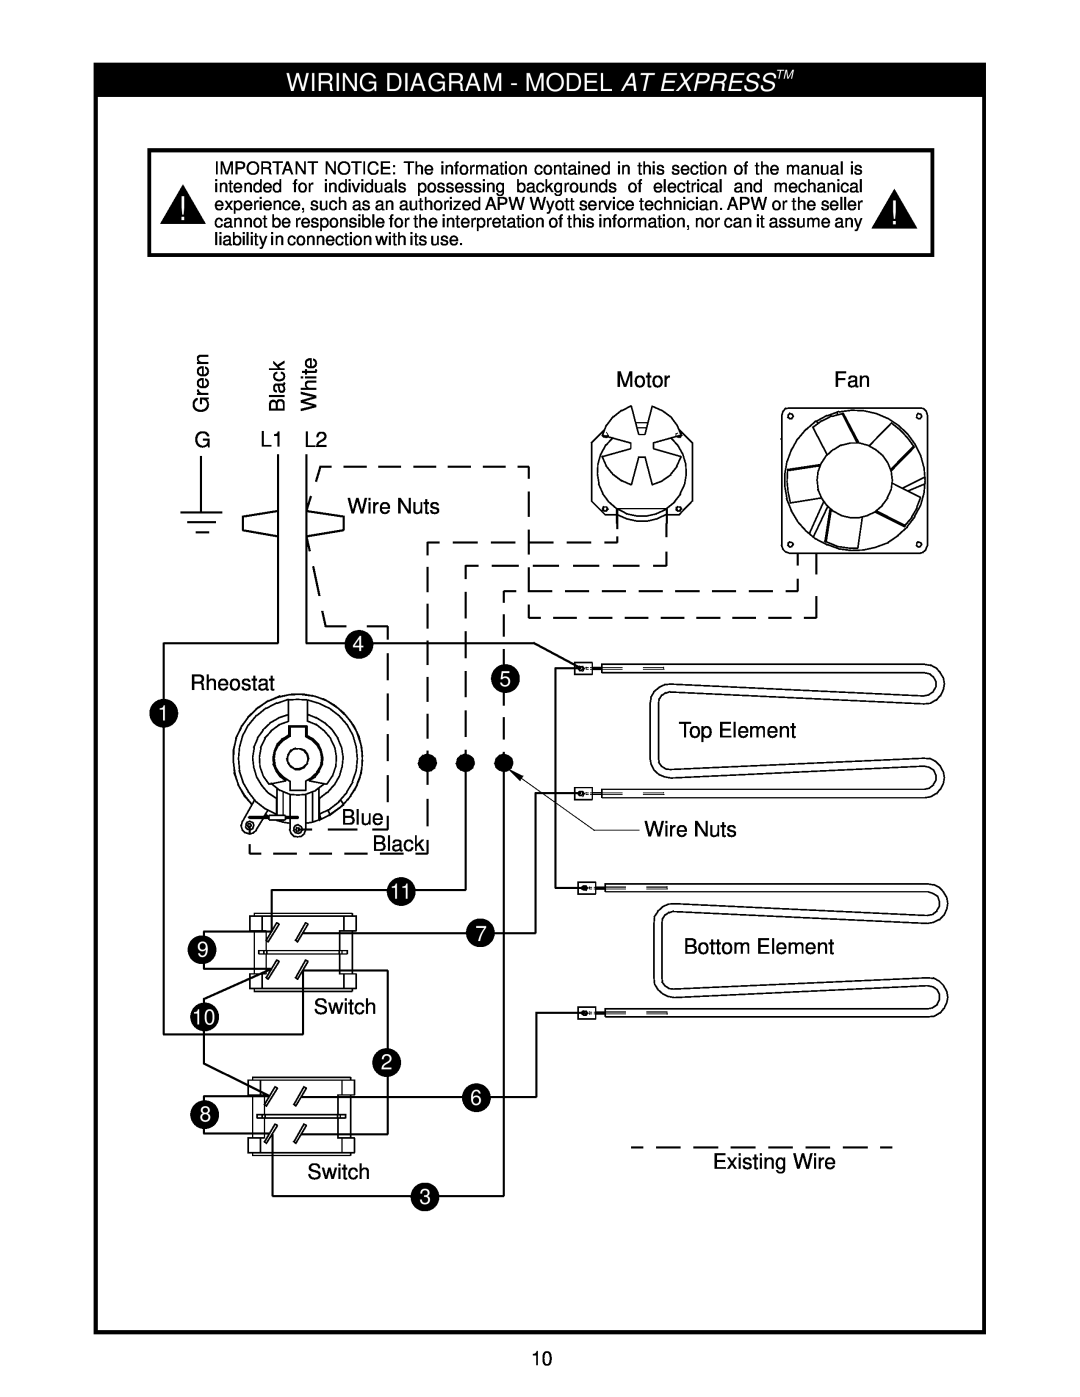 APW Wyott AT Express important safety instructions Wiring Diagram - Model At Expresstm 